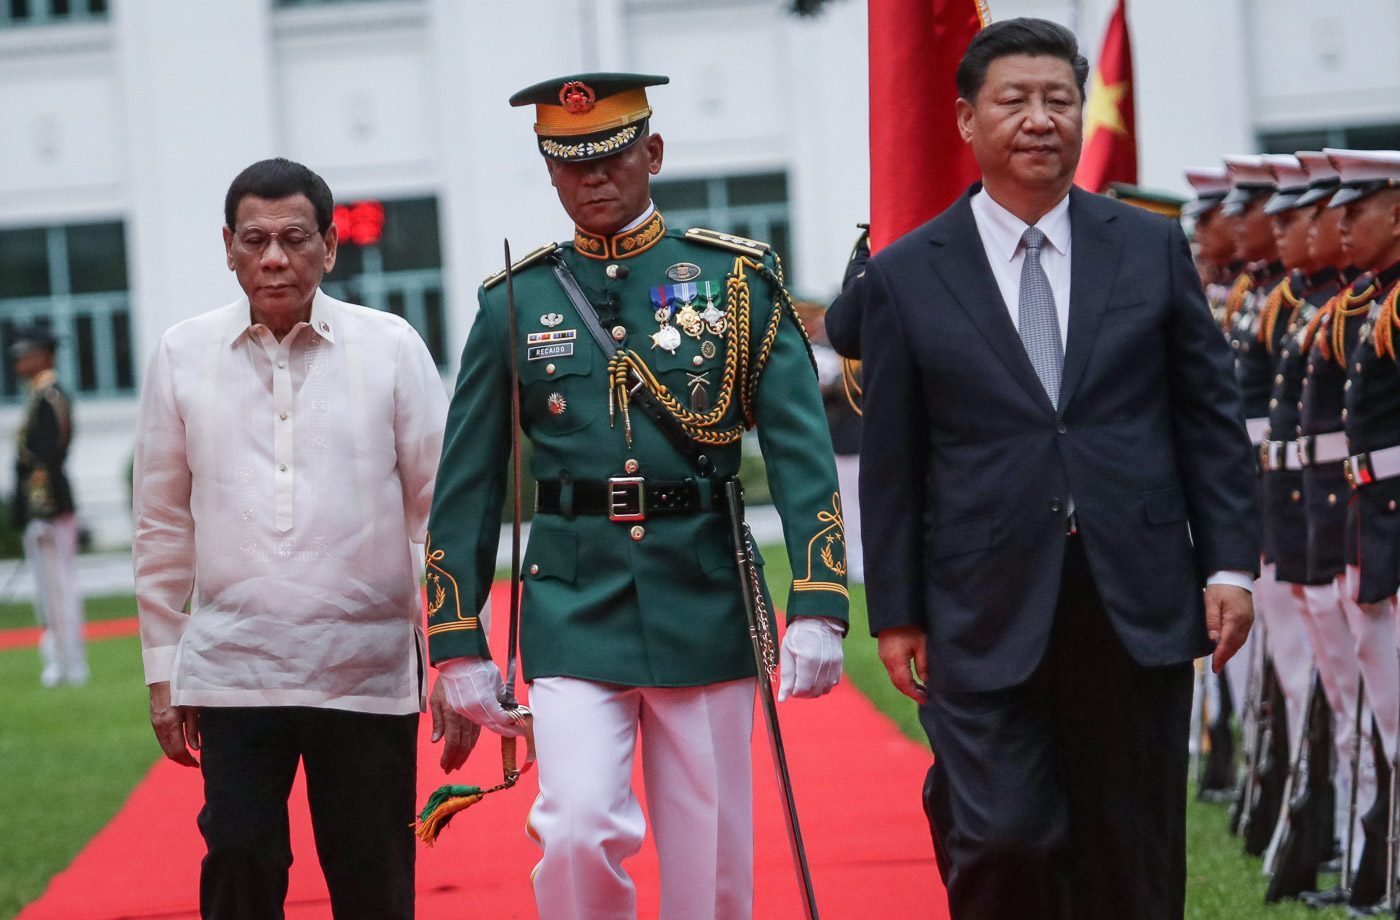 Xi Jinping: Friendship, cooperation ‘only correct choice’ for PH, China